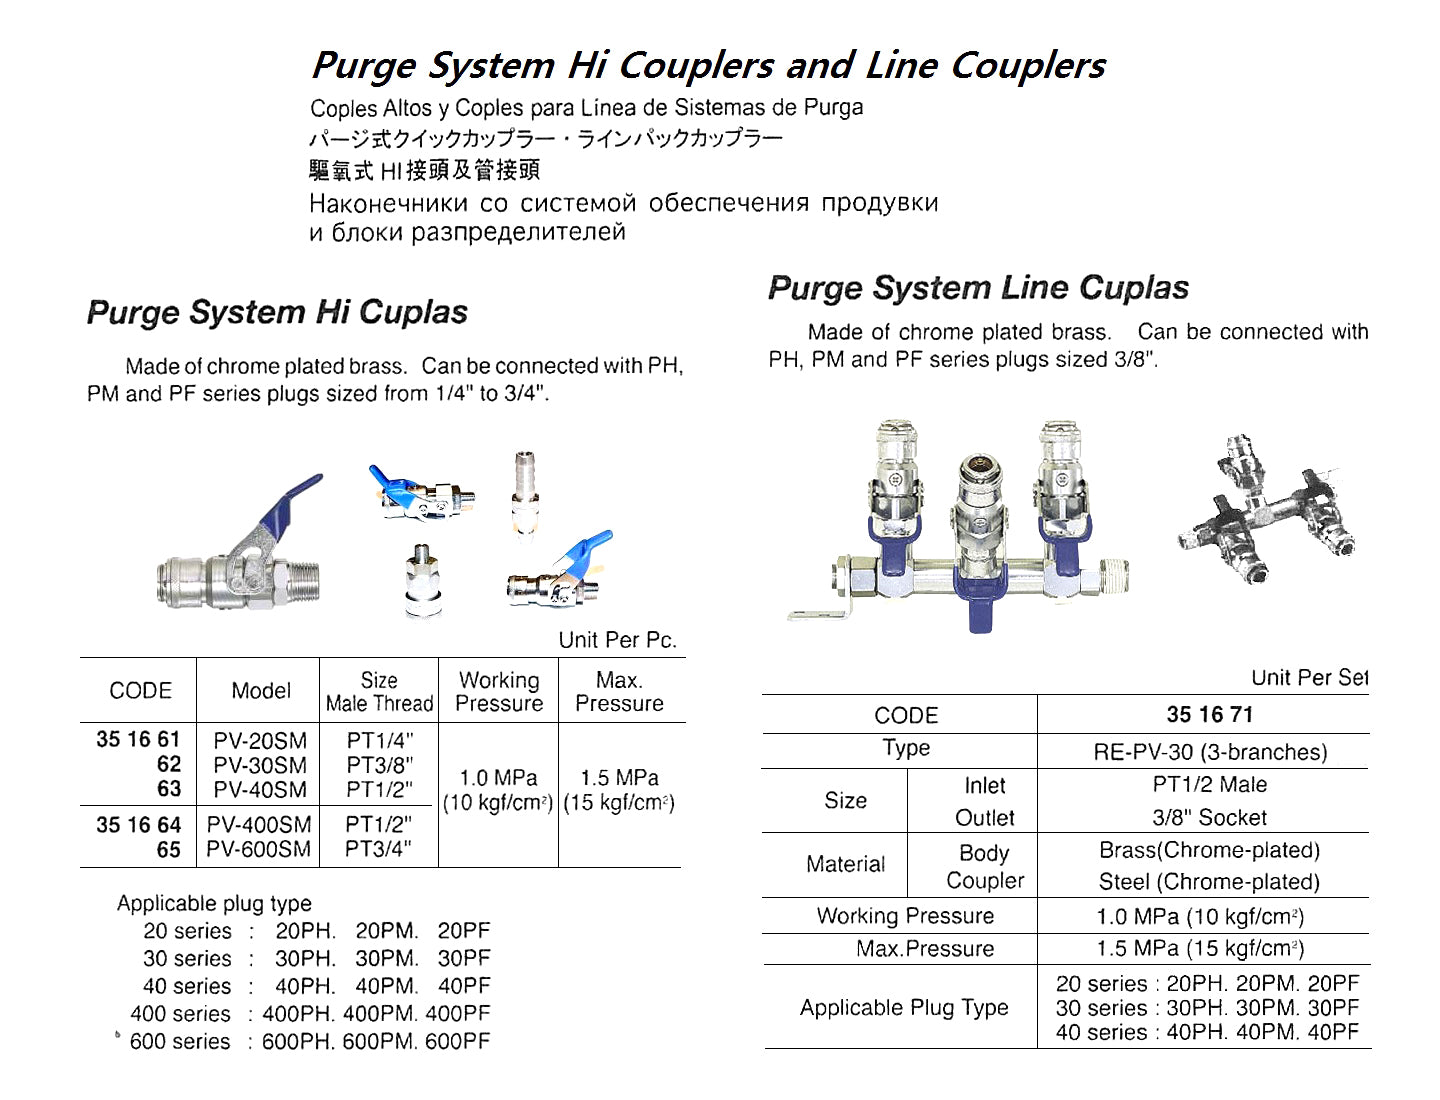 351671-LINE COUPLER PURGE SYSTEM, RE-PV-30(3-BR) INLET R1/2MALE